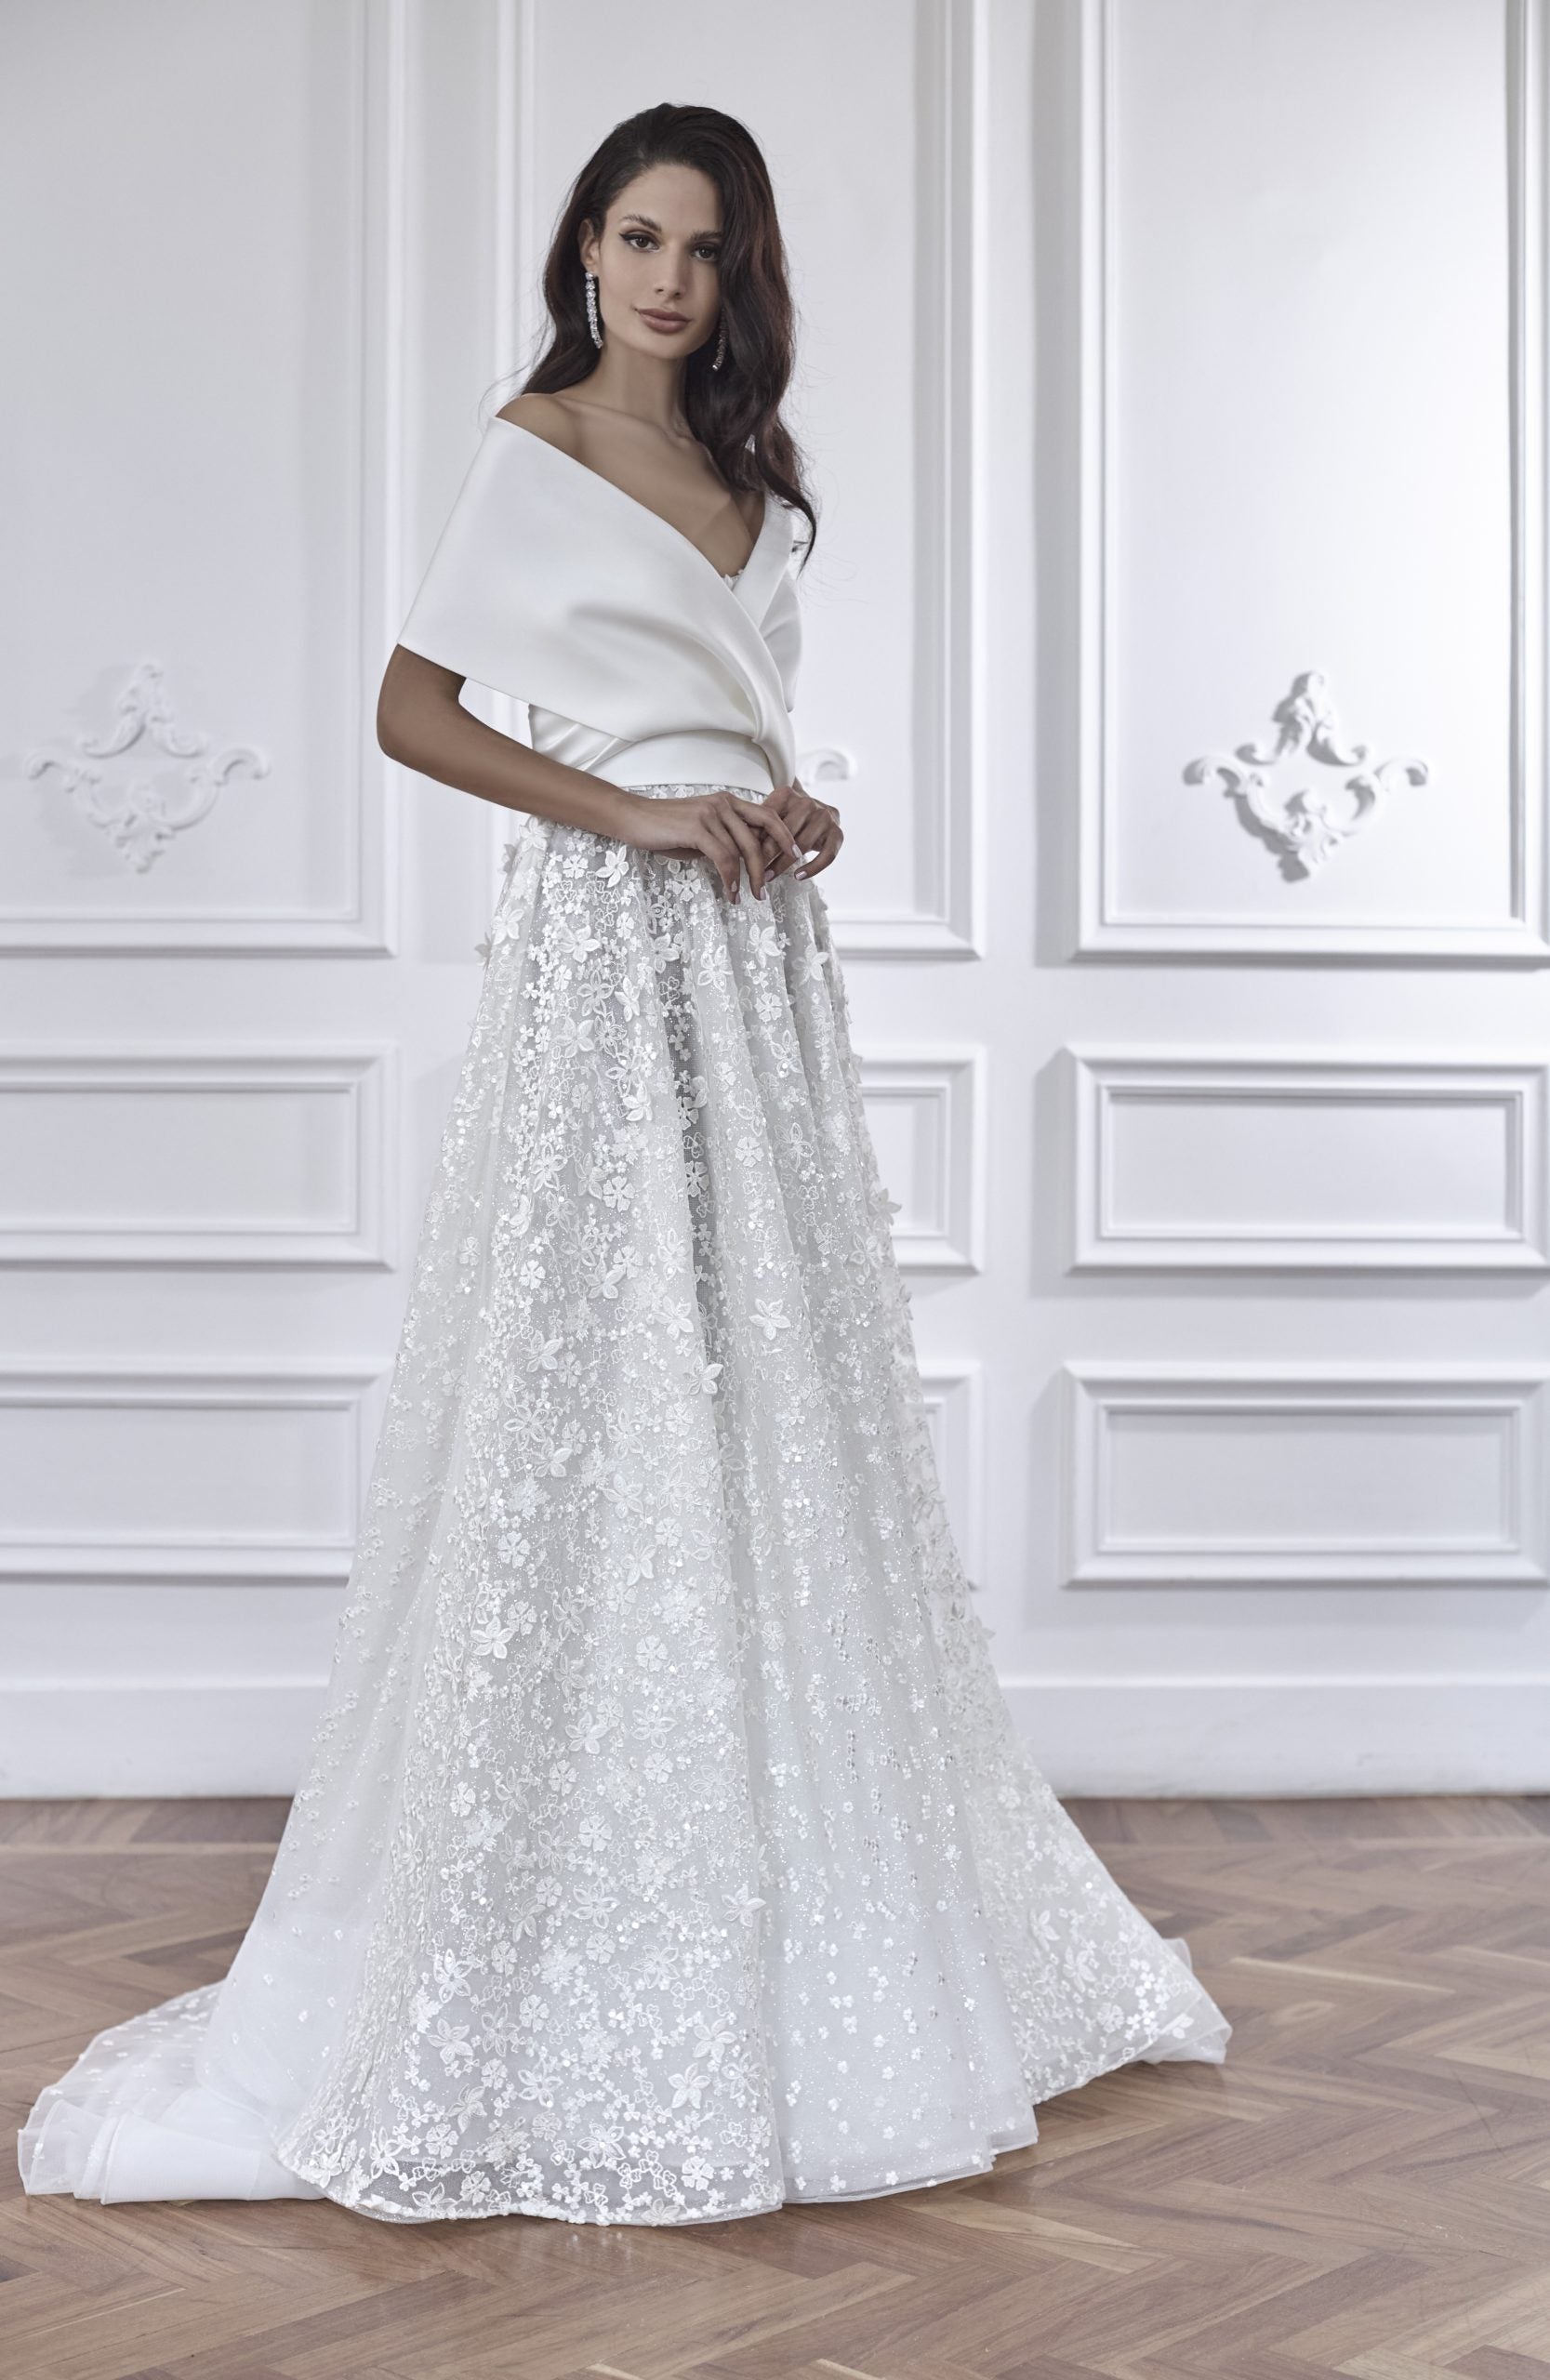 Strapless A-line Wedding Dress With 3D Floral Embroidery by Maison Signore - Image 3